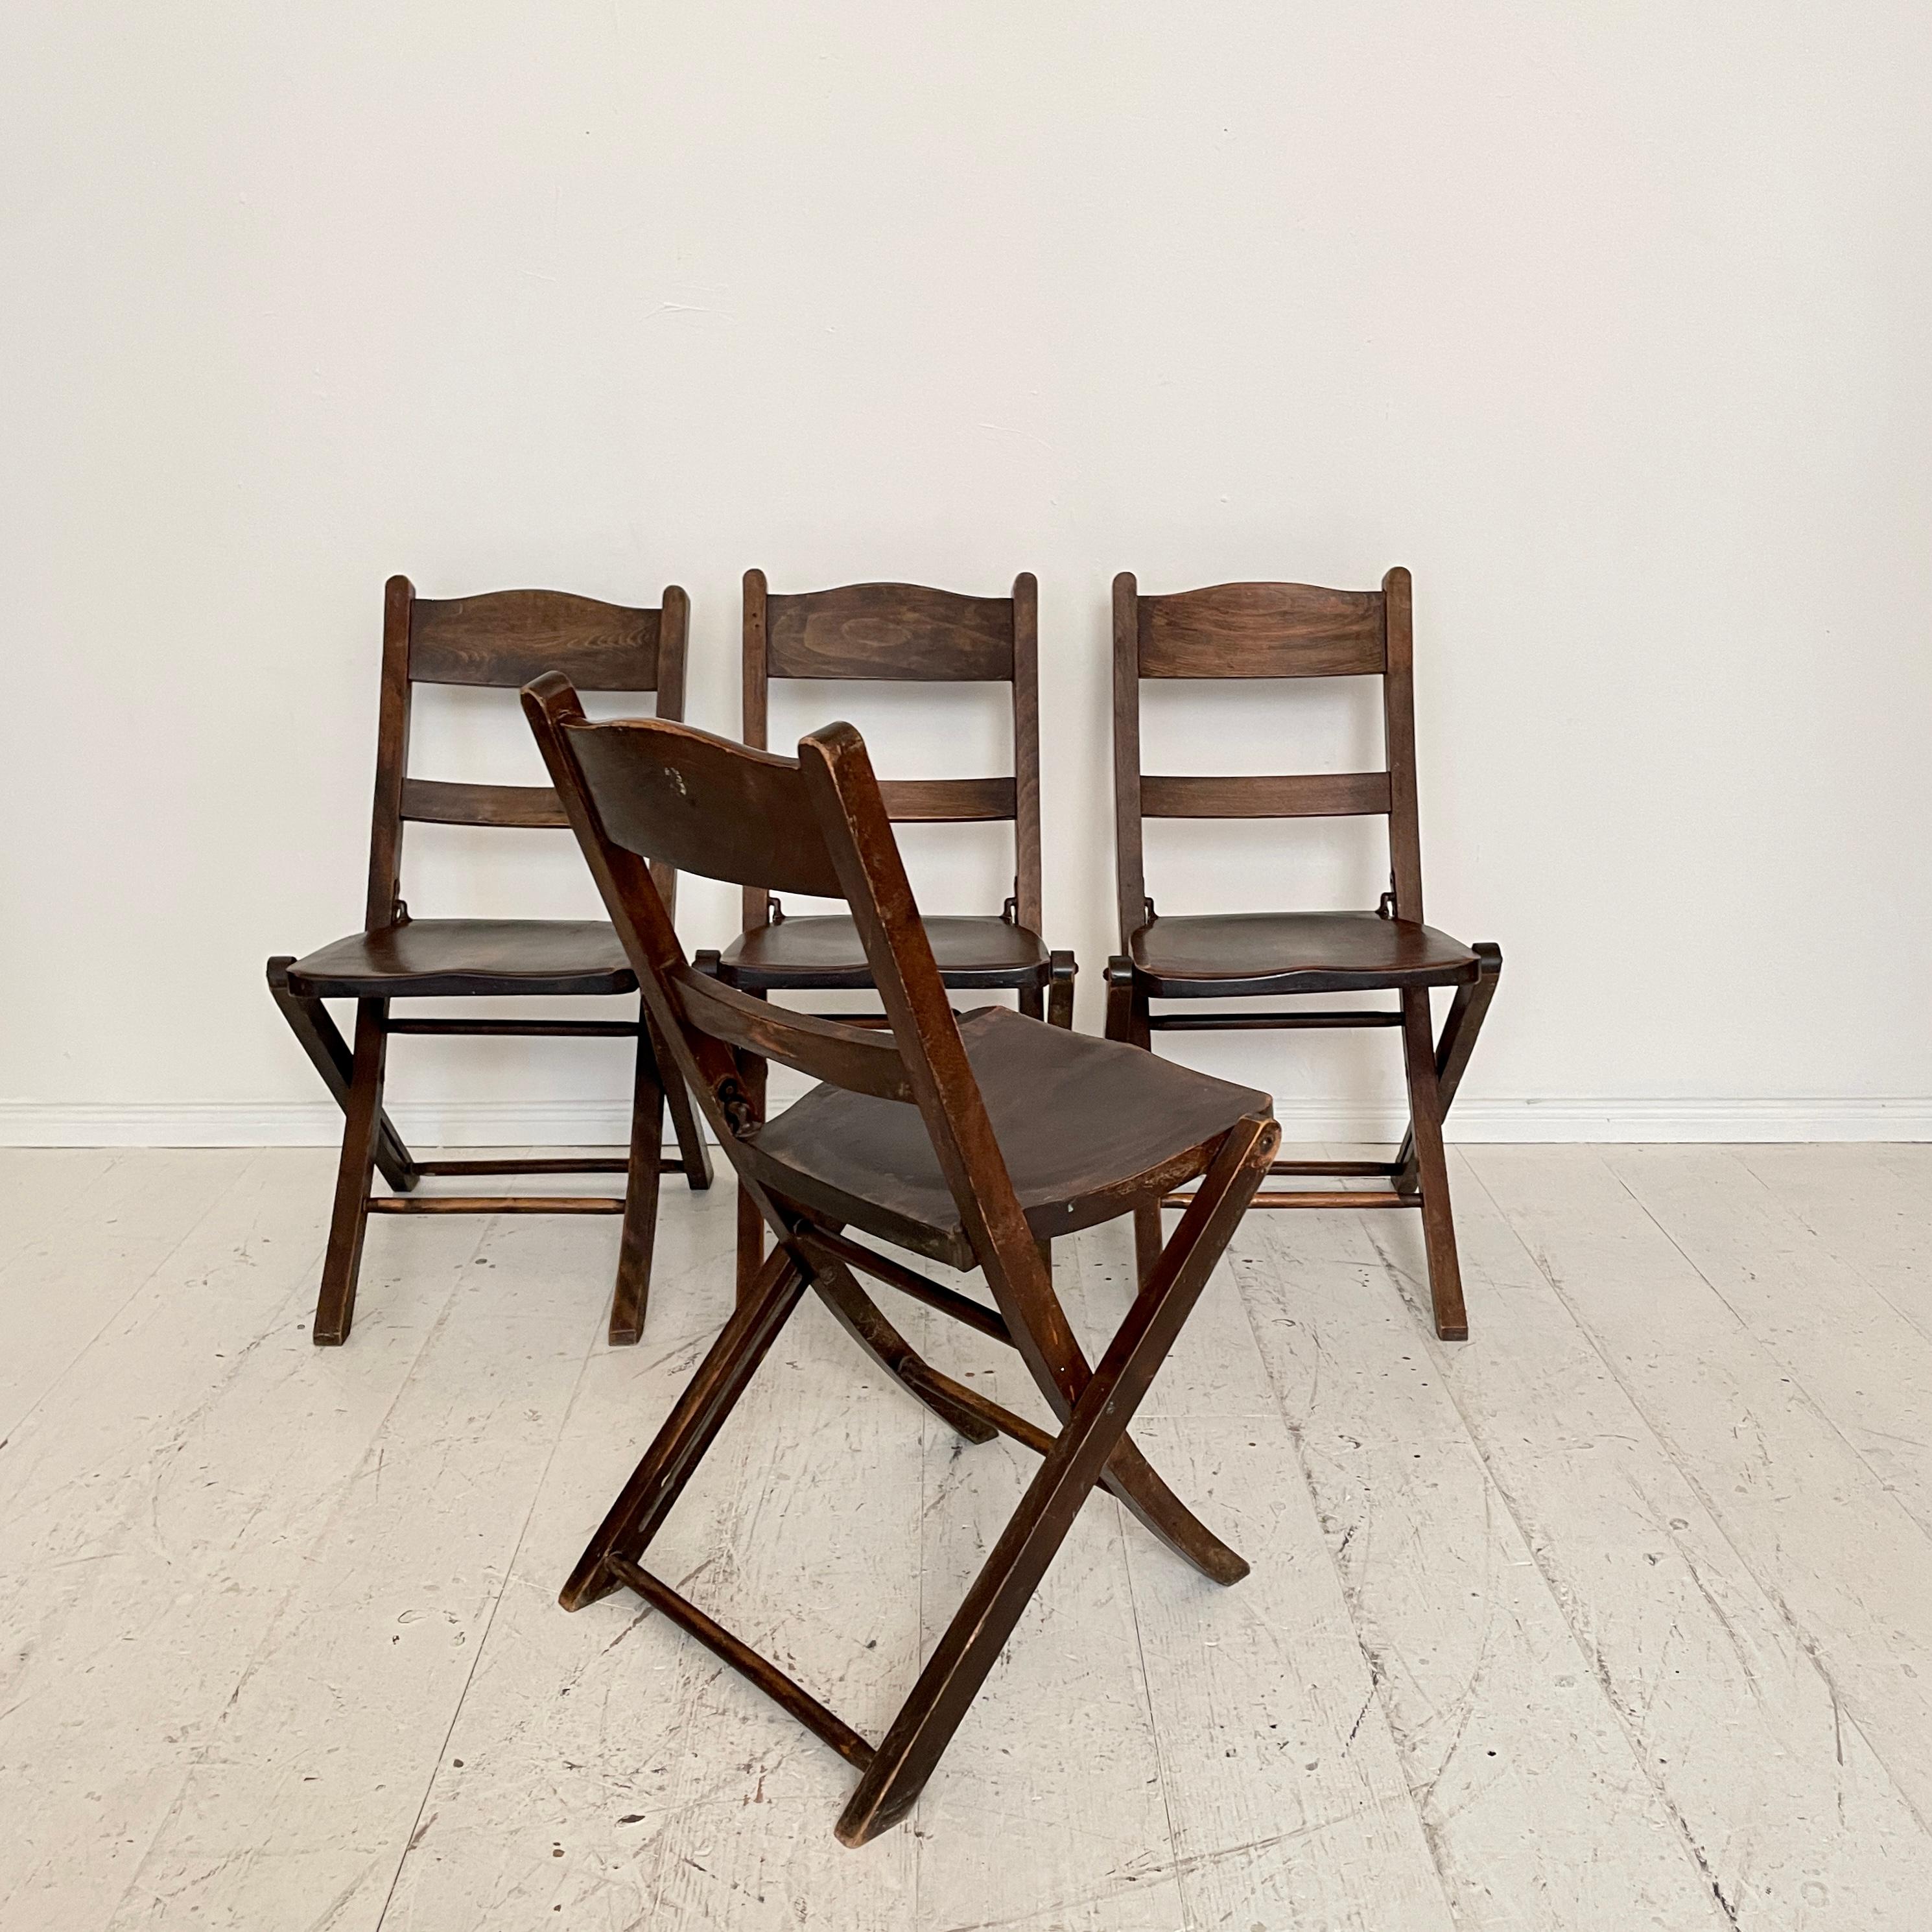 Set of 4 Art Deco Folding Chairs in Brown Beech and Ash, around 1930 For Sale 2